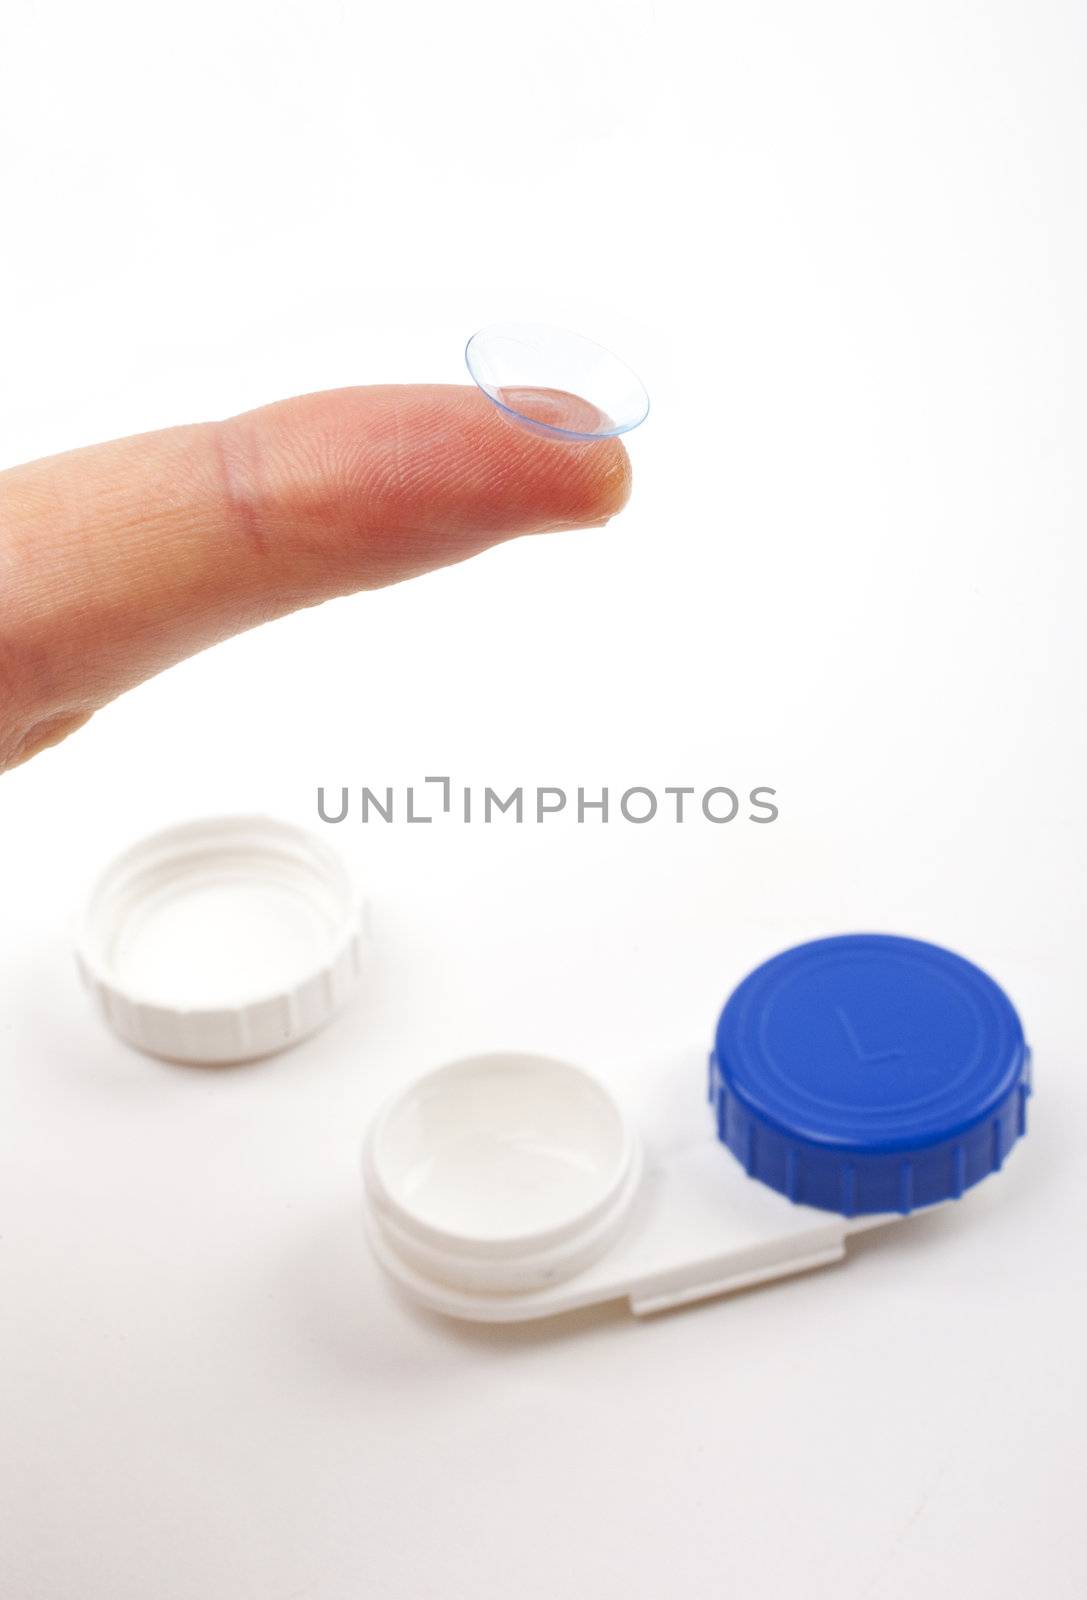 Contact Lenses and Case.